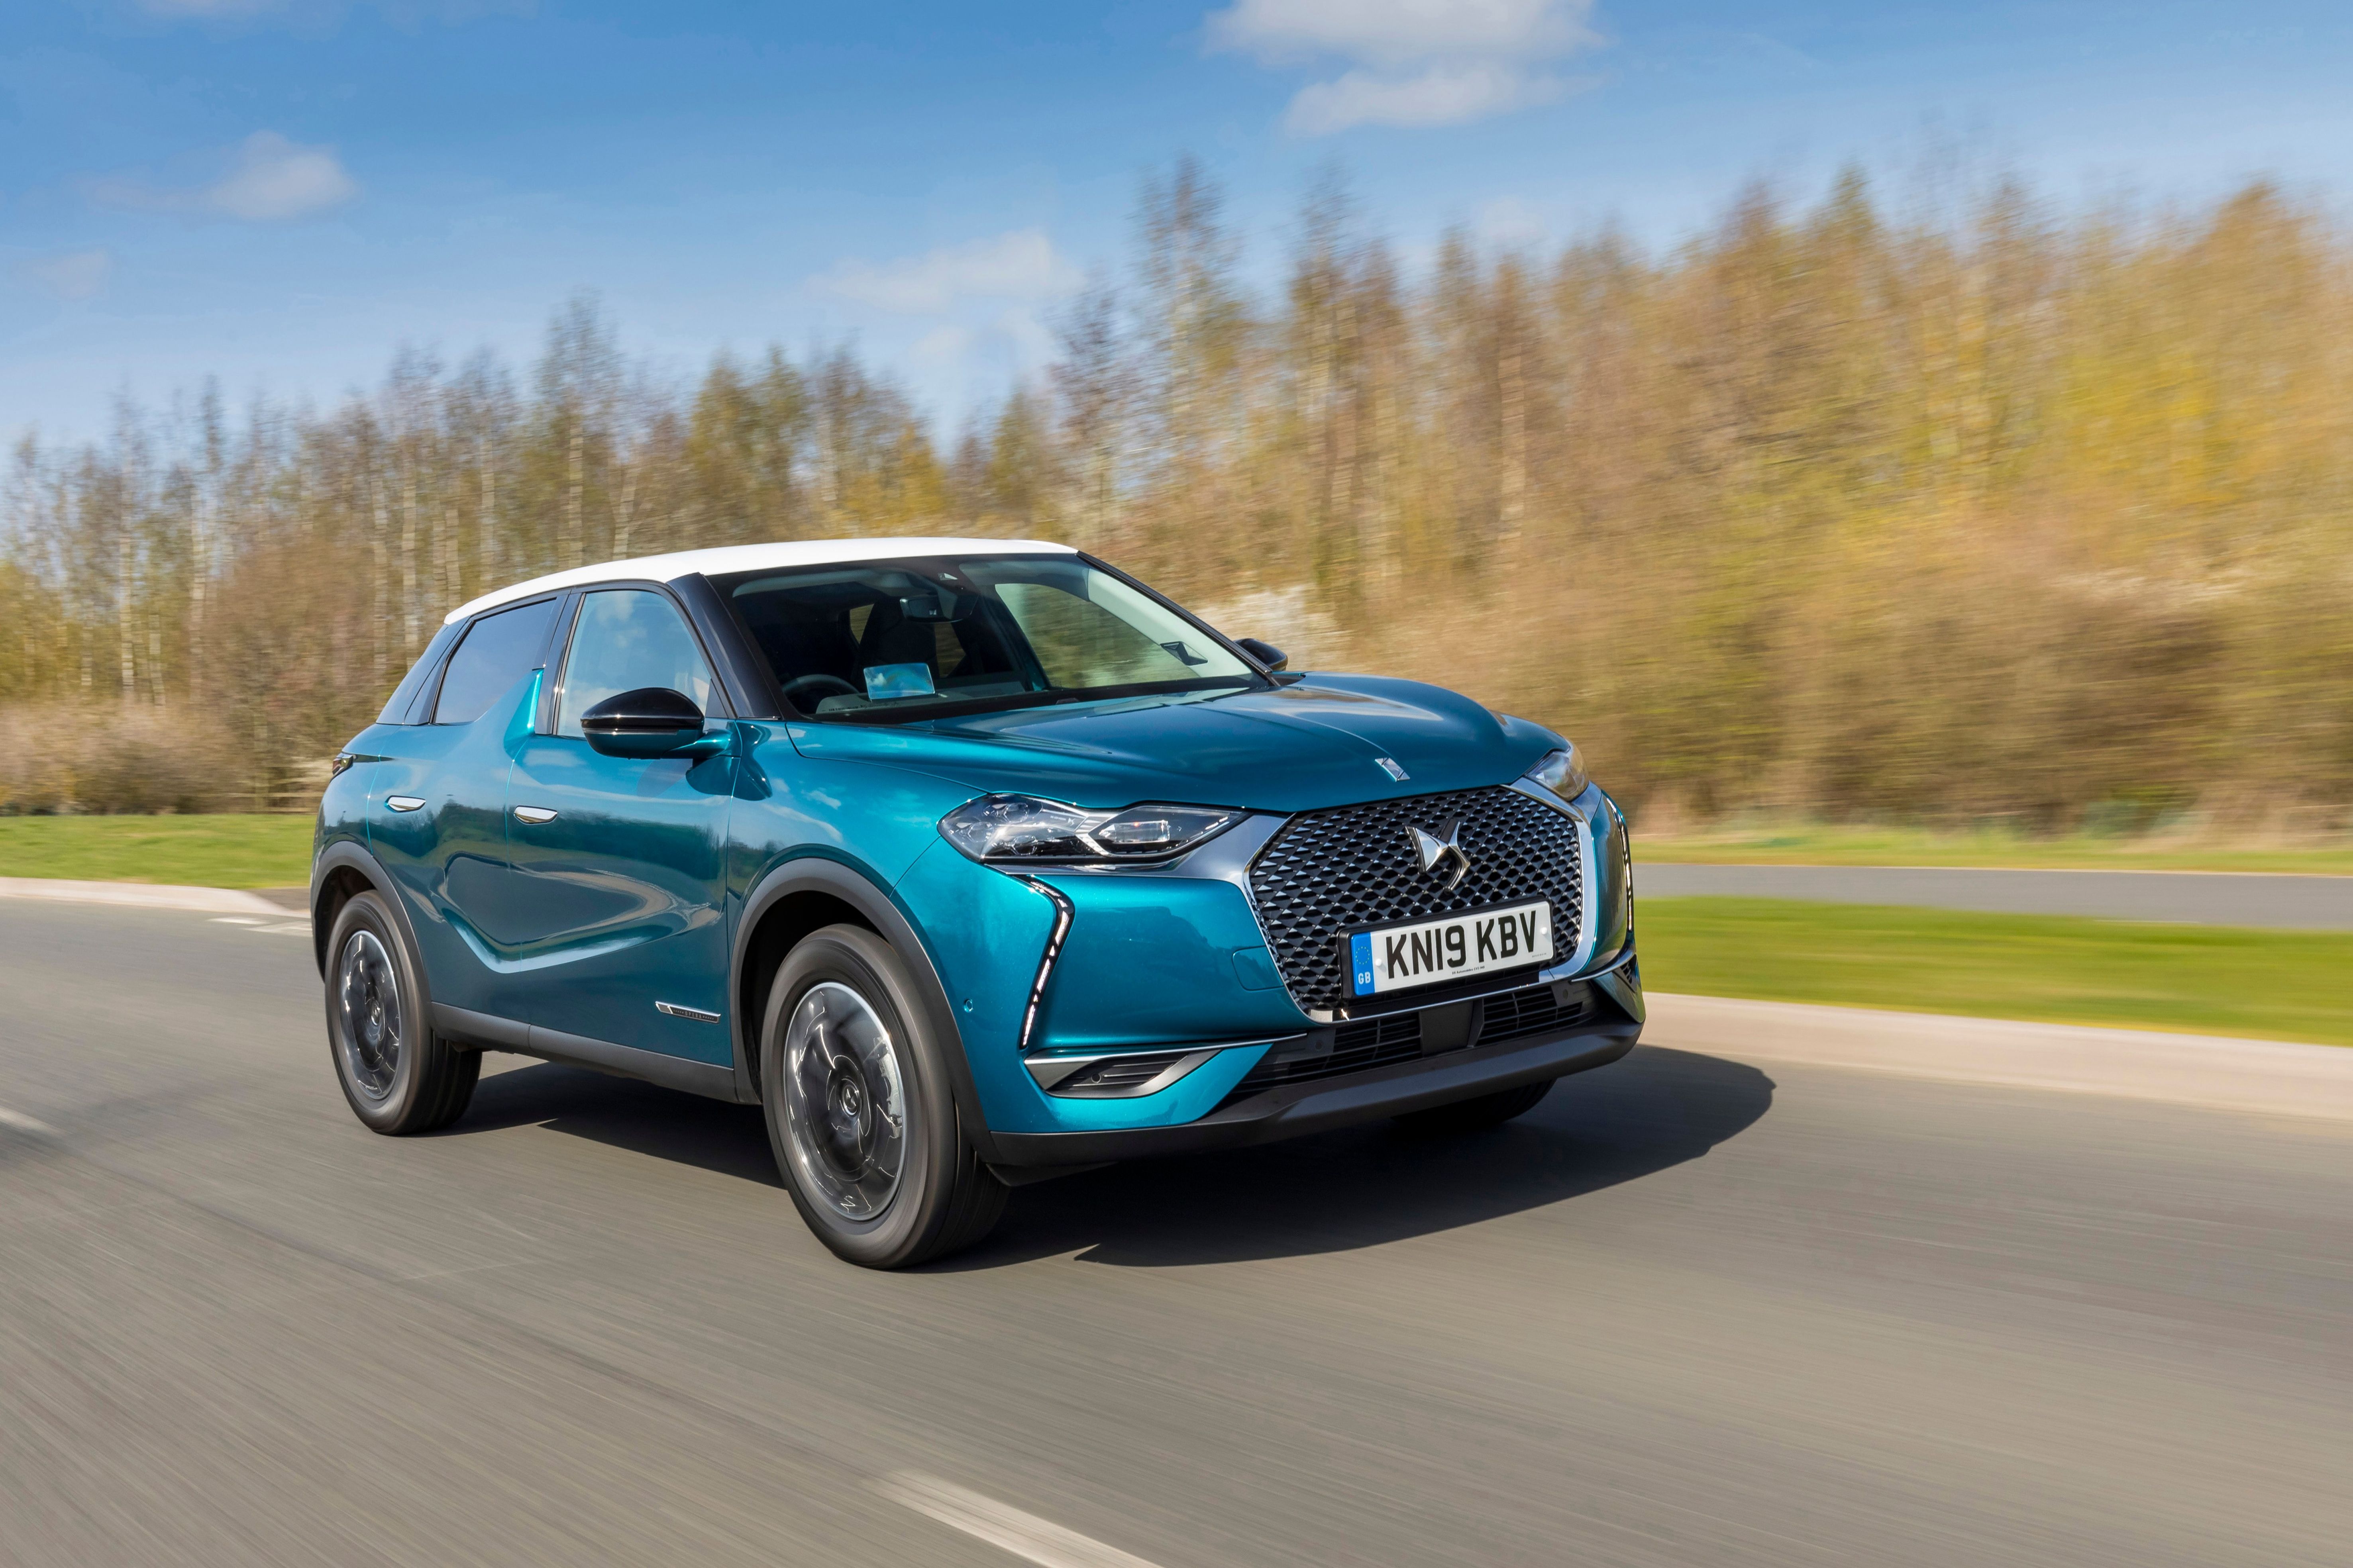 Driven: 2020 DS 7 Crossback Is The SUV You Never Knew You Wanted